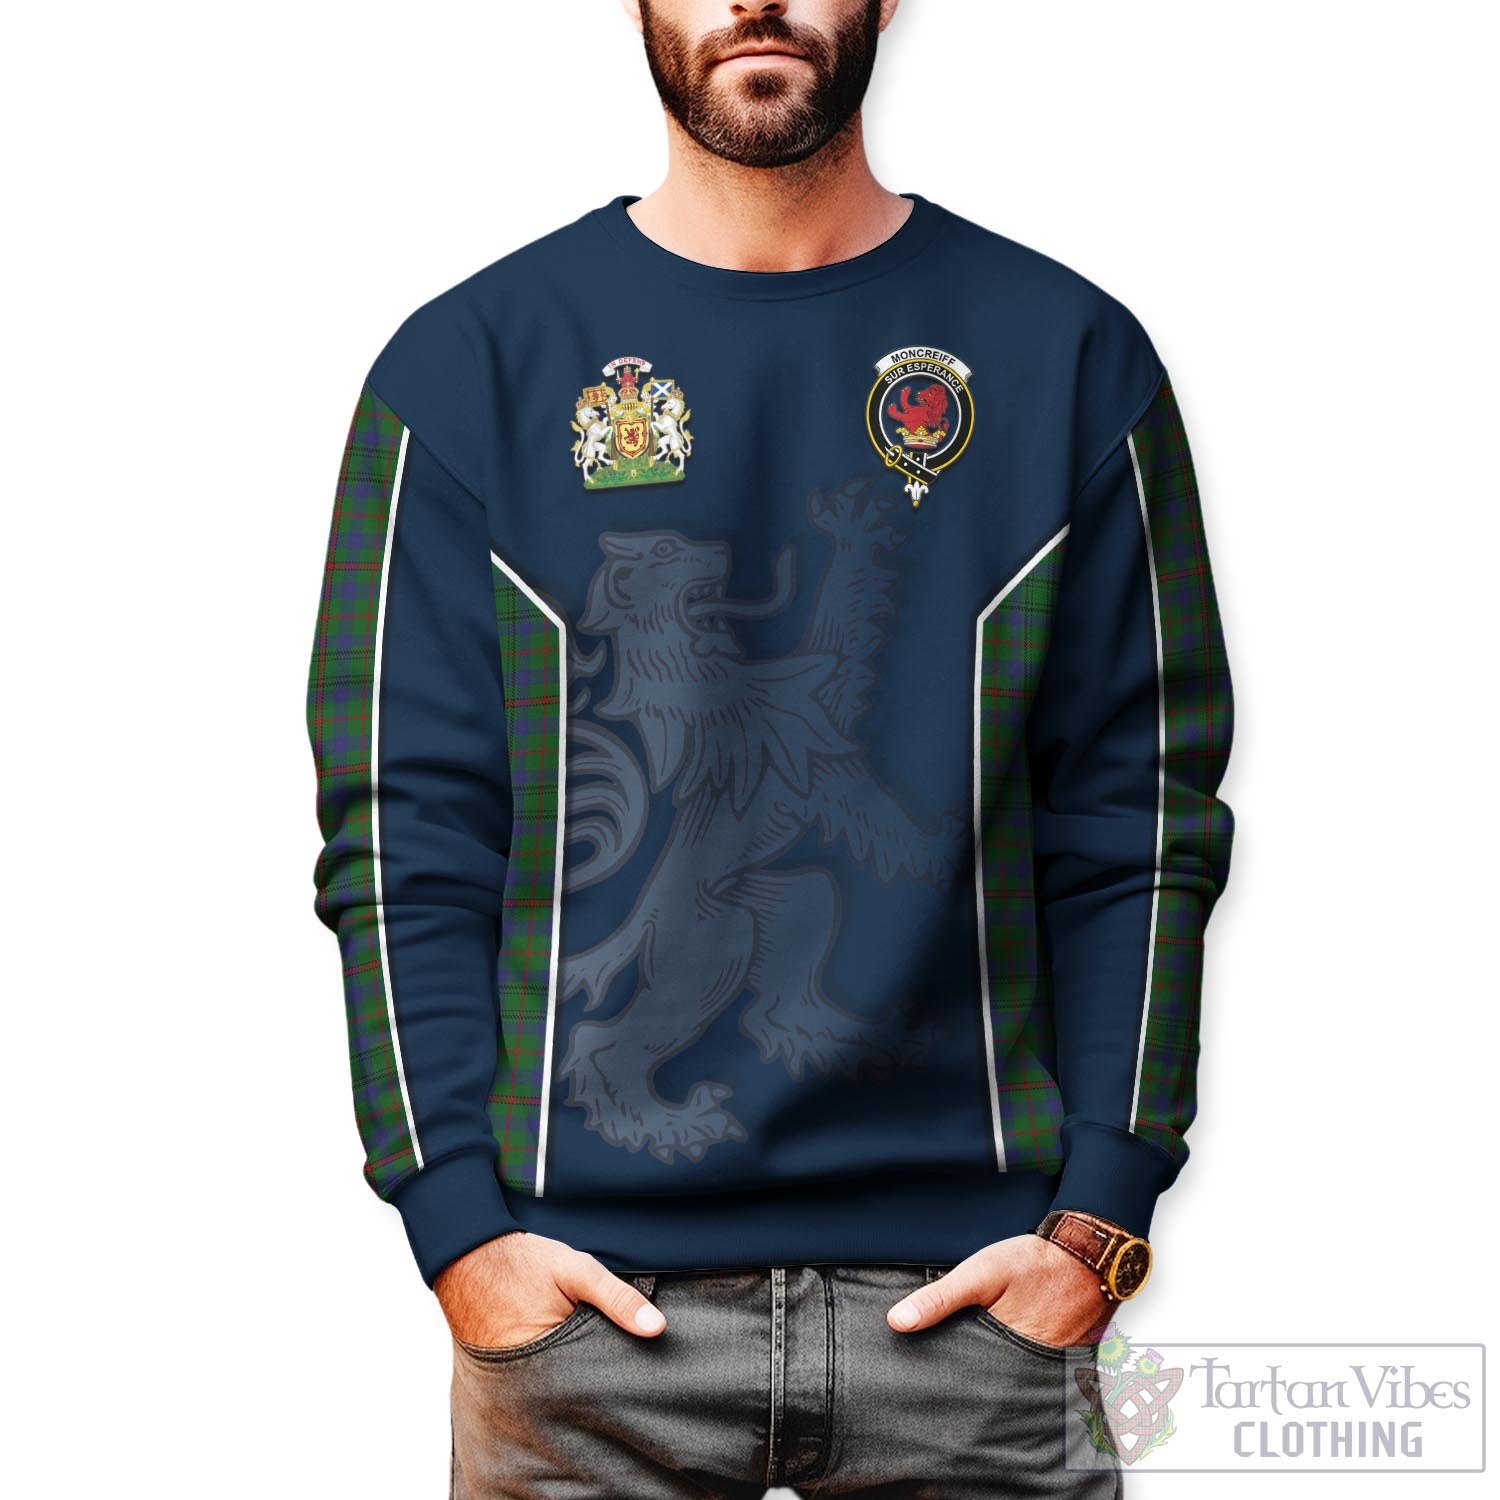 Tartan Vibes Clothing Moncrieff of Atholl Tartan Sweater with Family Crest and Lion Rampant Vibes Sport Style